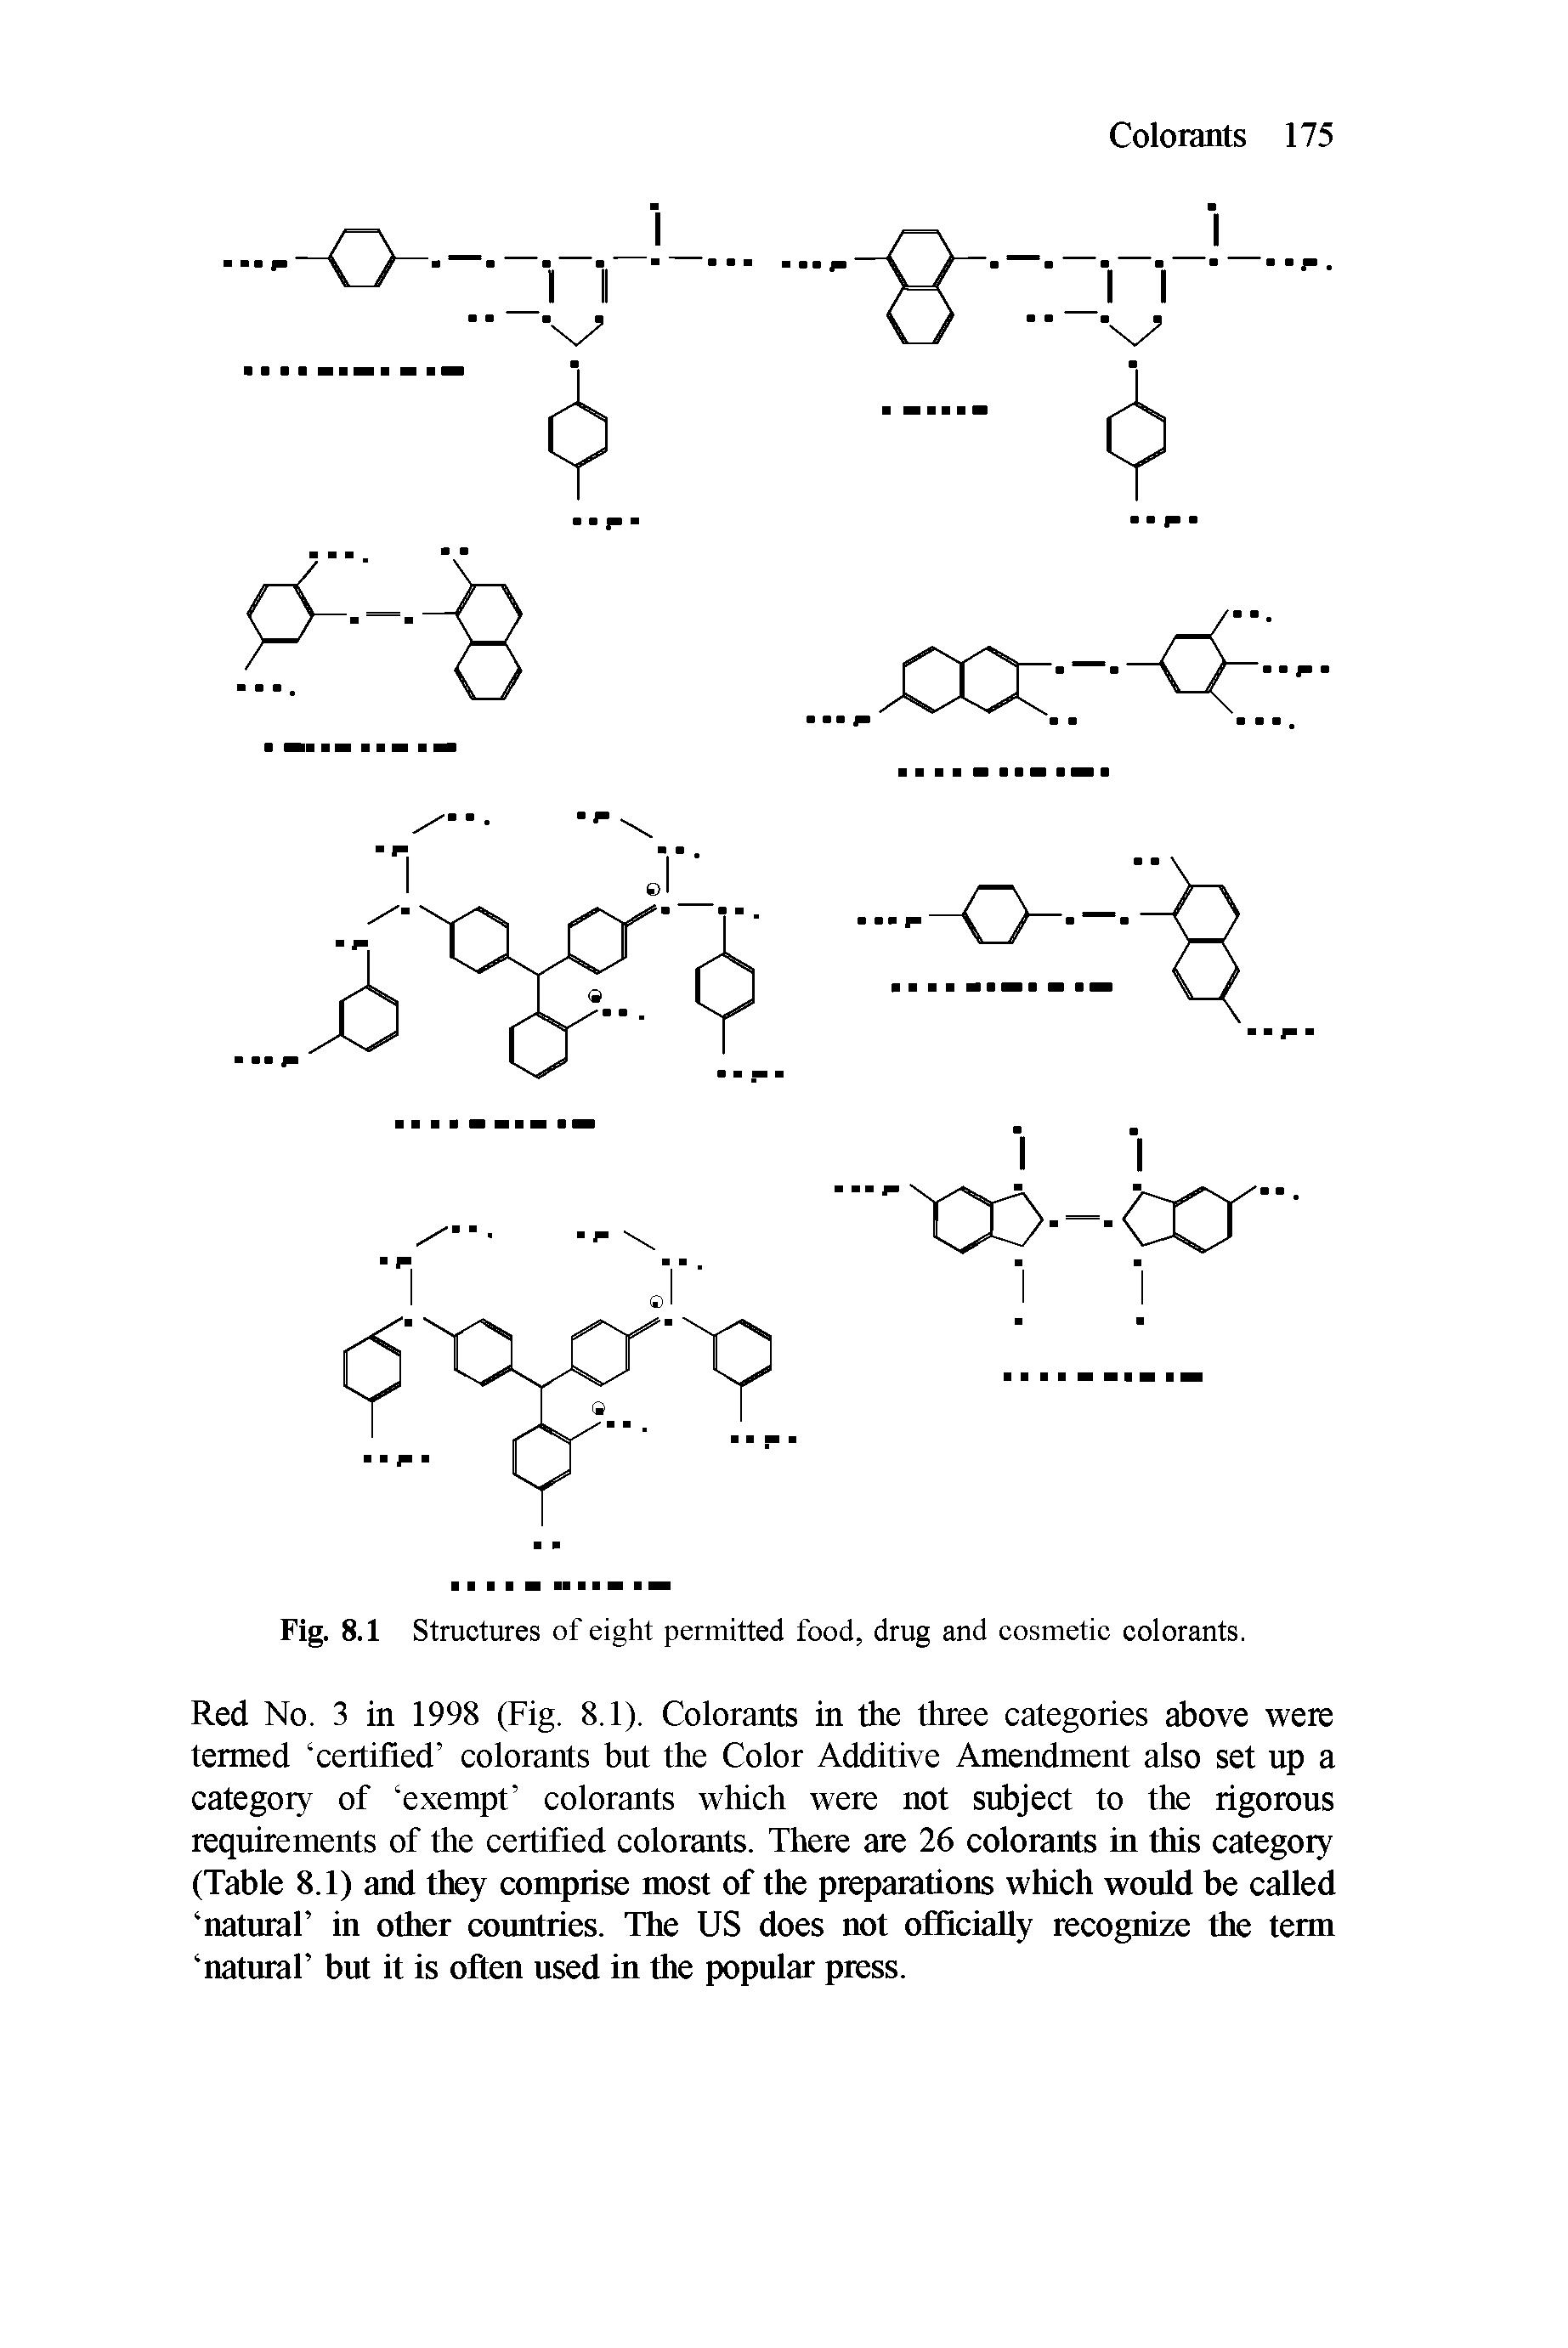 Fig. 8.1 Structures of eight permitted food, drug and cosmetic colorants.